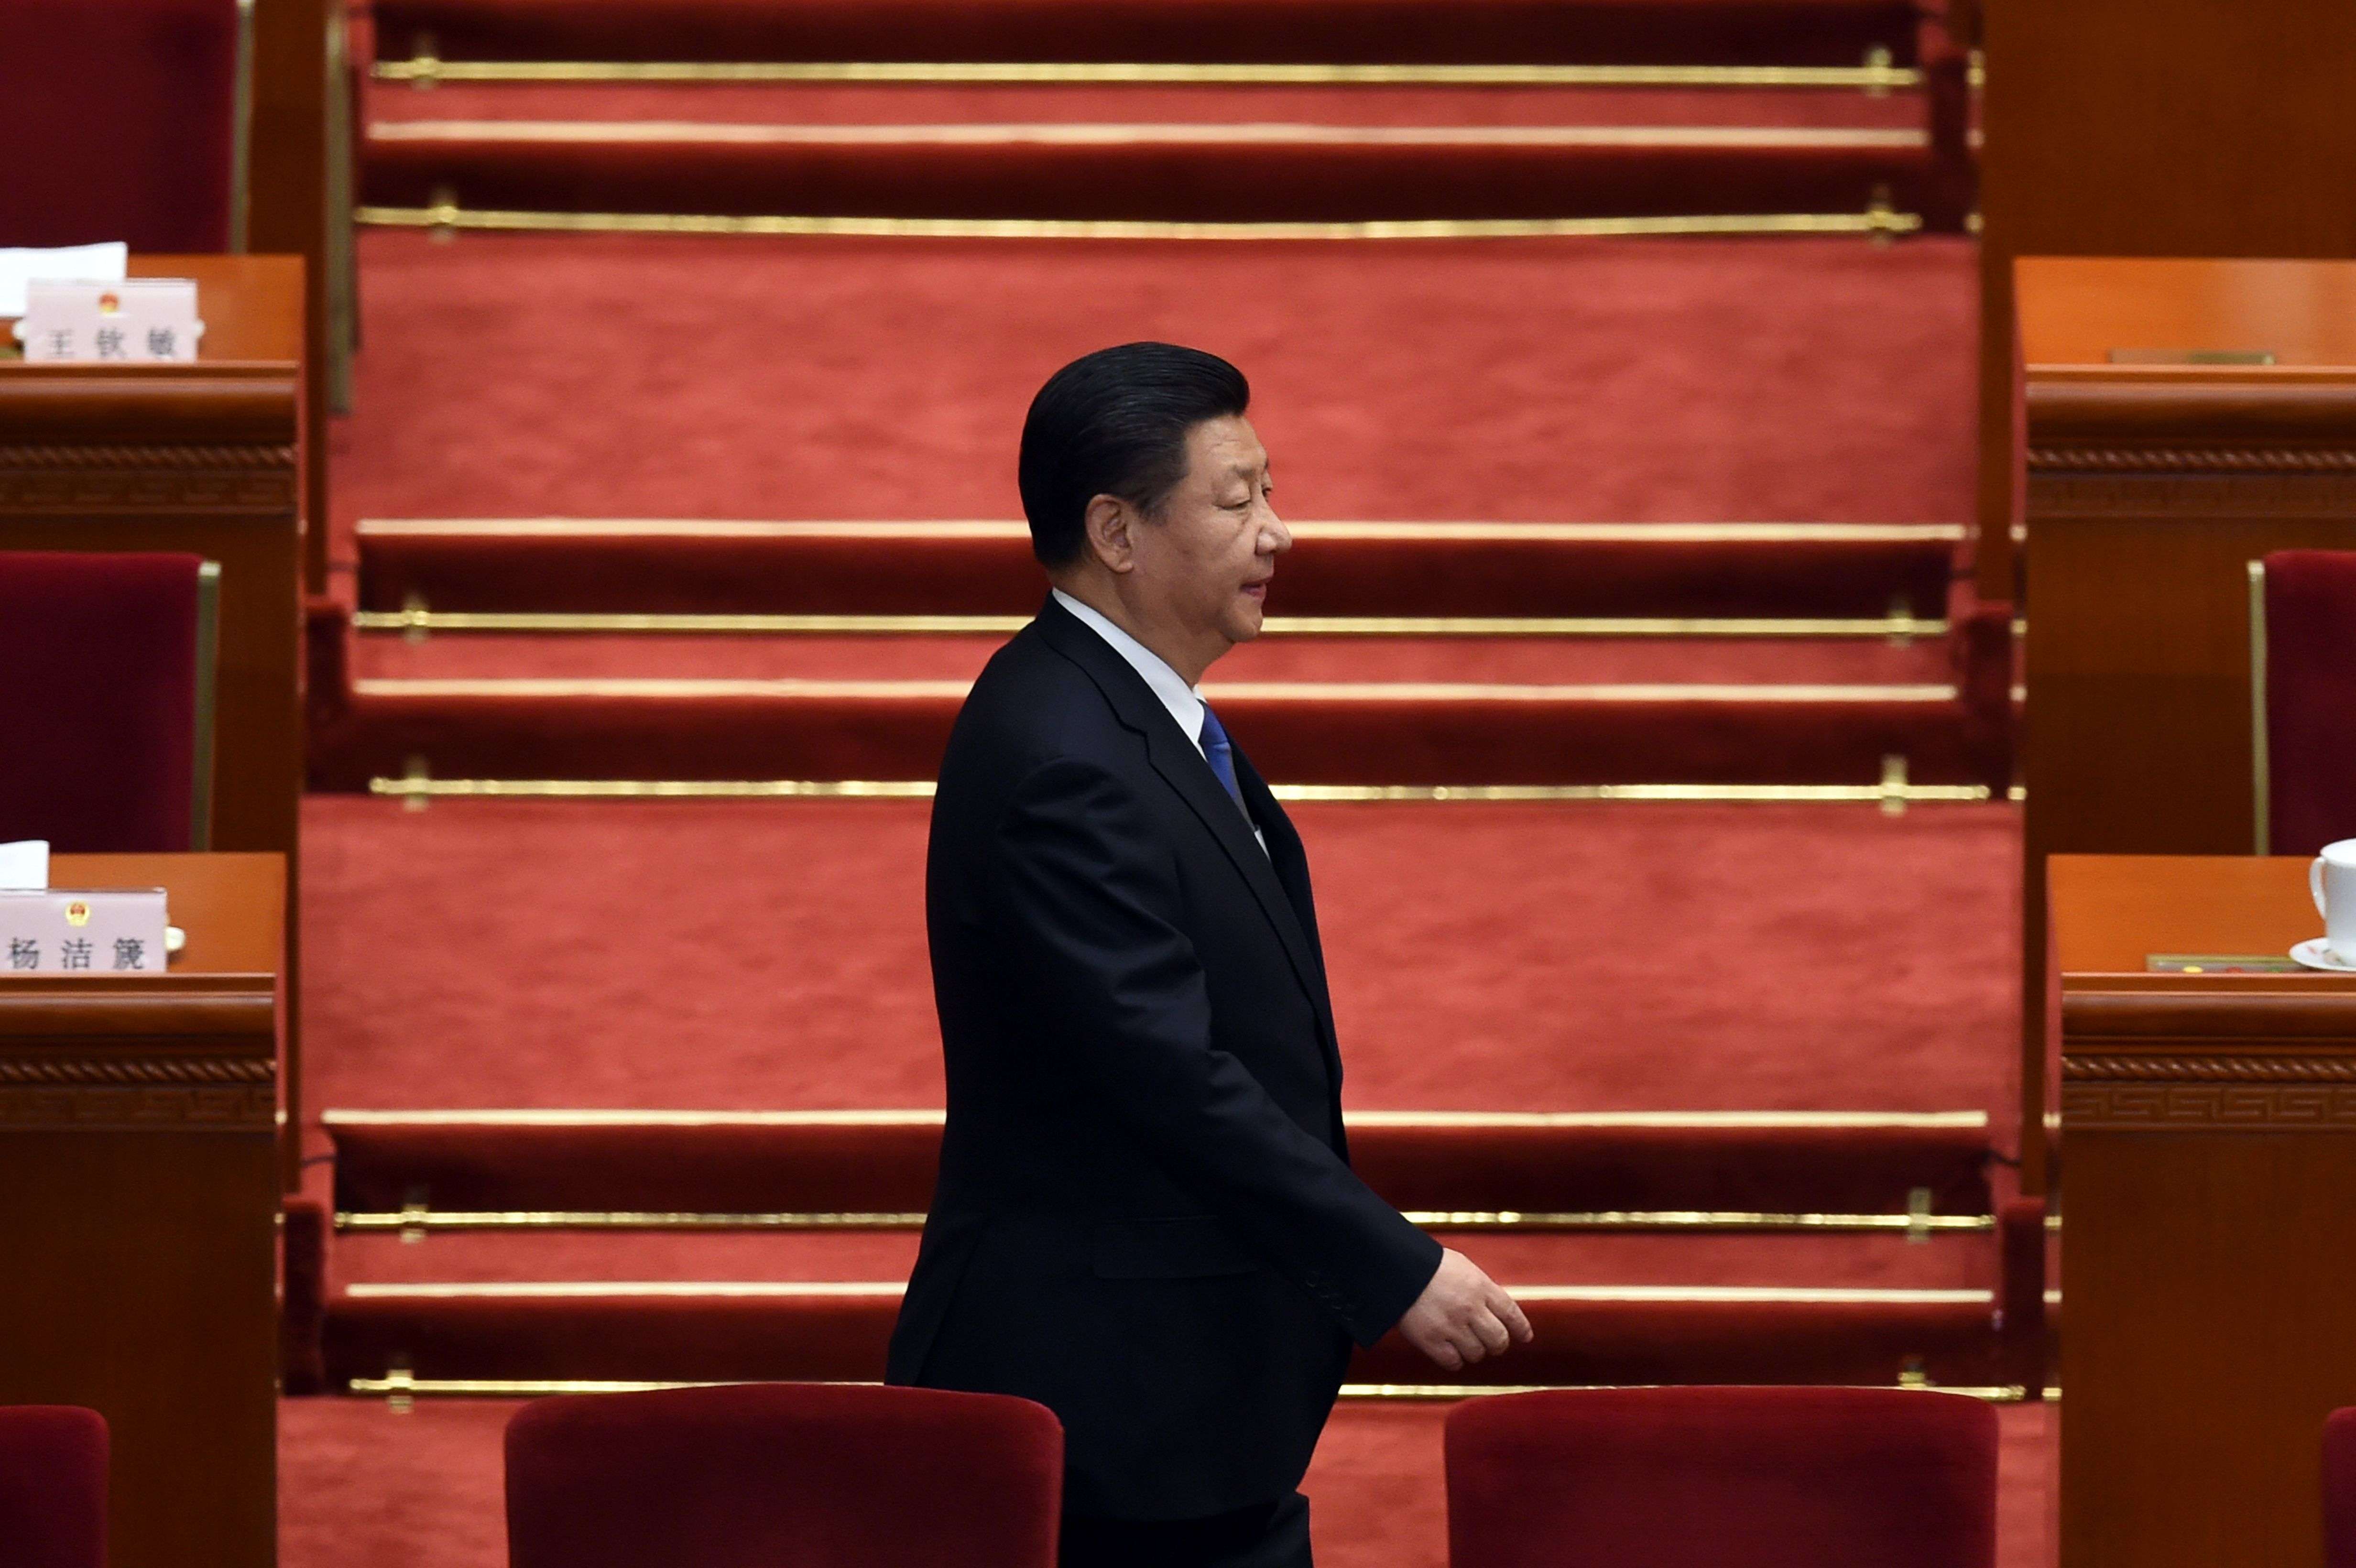 President Xi Jinping arrives for a session of the National People's Congress in the Great Hall of the People in Beijing, where a new five-year plan was approved. Photo: AFP